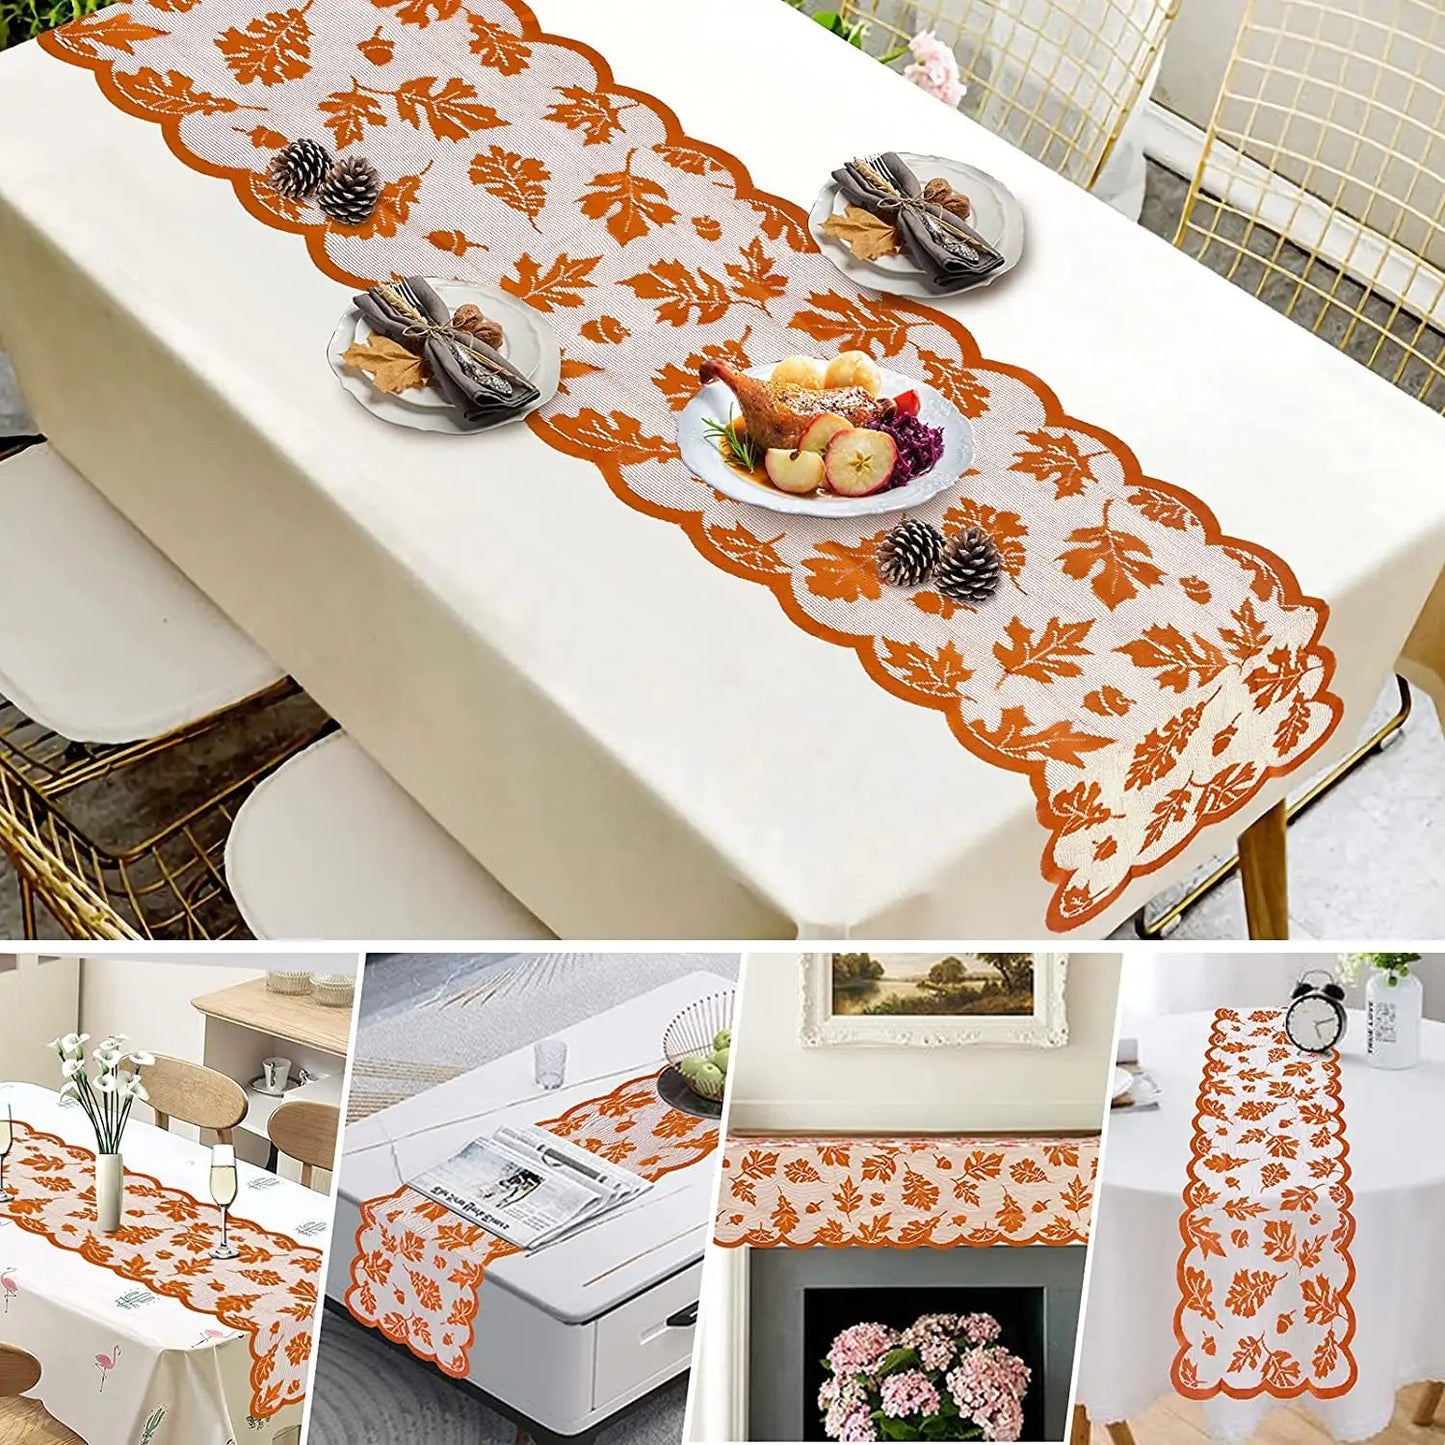 a collage of photos of a table with a white tablecloth and orange table